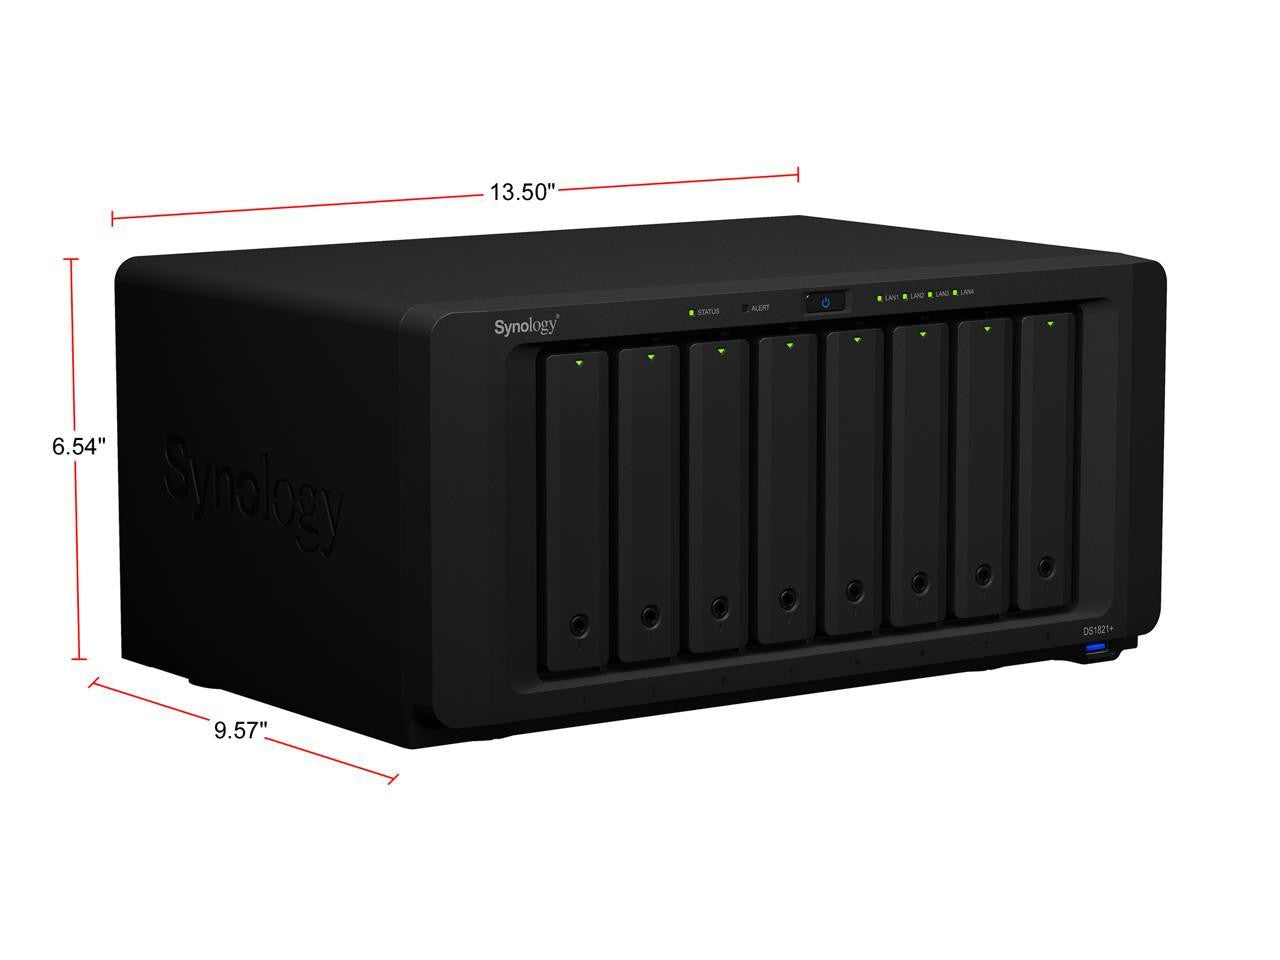 Synology DS1821+ 8-BAY DiskStation with 32GB RAM, 800GB (2x400GB) Cache, E10G18-T2 RJ45 10Gb Adapter and 96TB (8 x 12TB) of Synology Enterprise HAT5300 Drives Fully Assembled and Tested